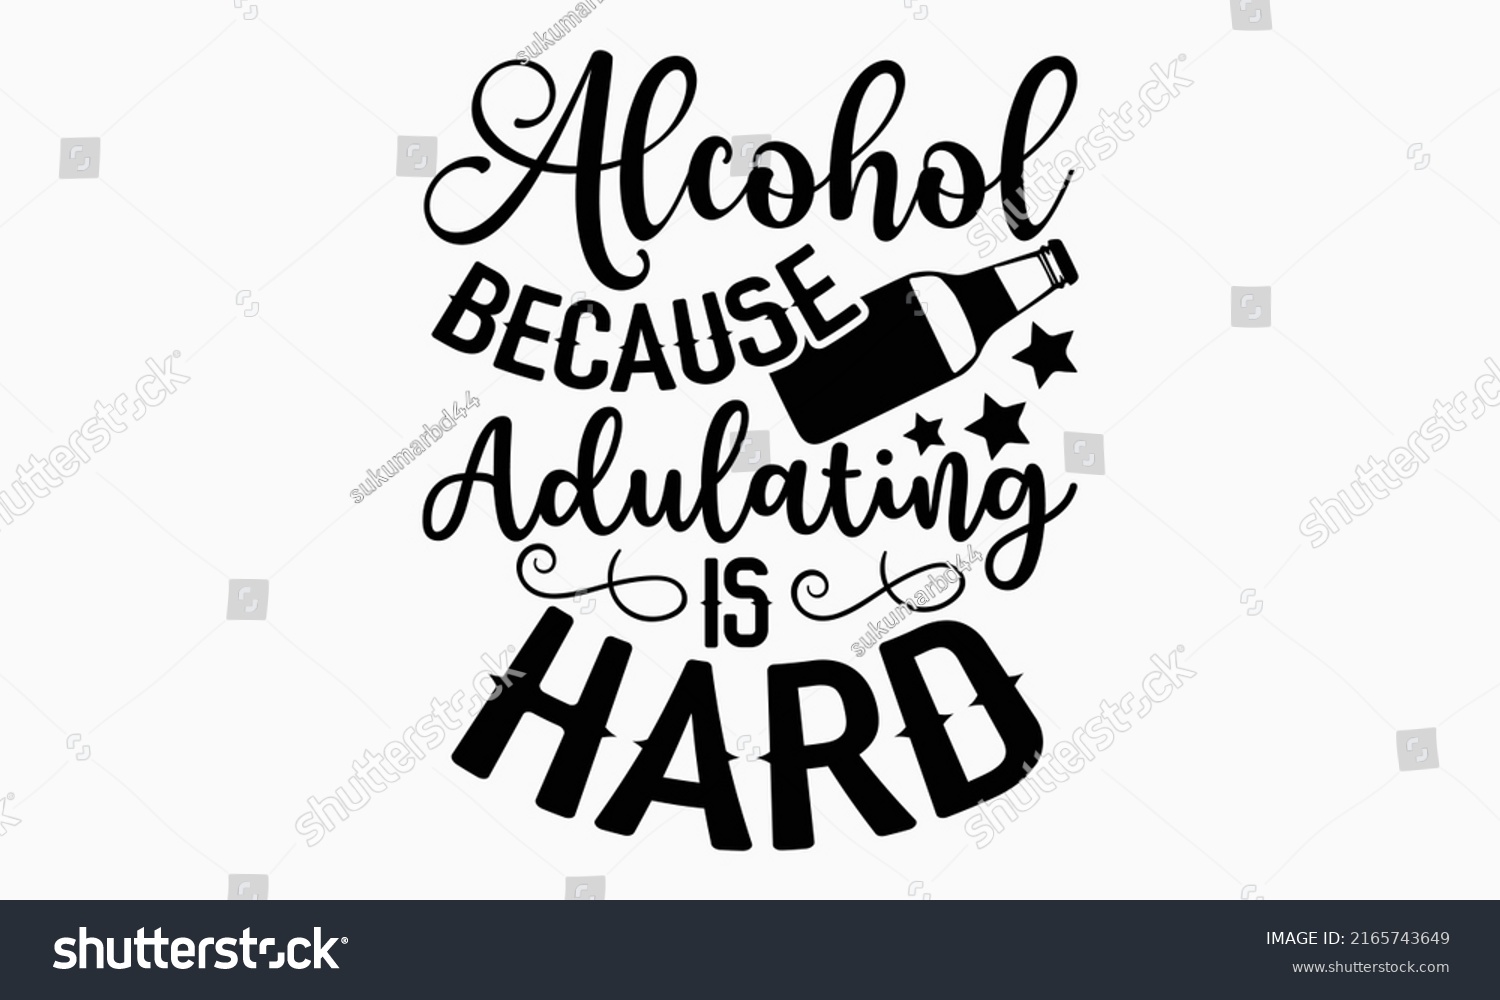 SVG of Alcohol because adulating is hard - Alcohol t shirt design, Hand drawn lettering phrase, Calligraphy graphic design, SVG Files for Cutting Cricut and Silhouette svg